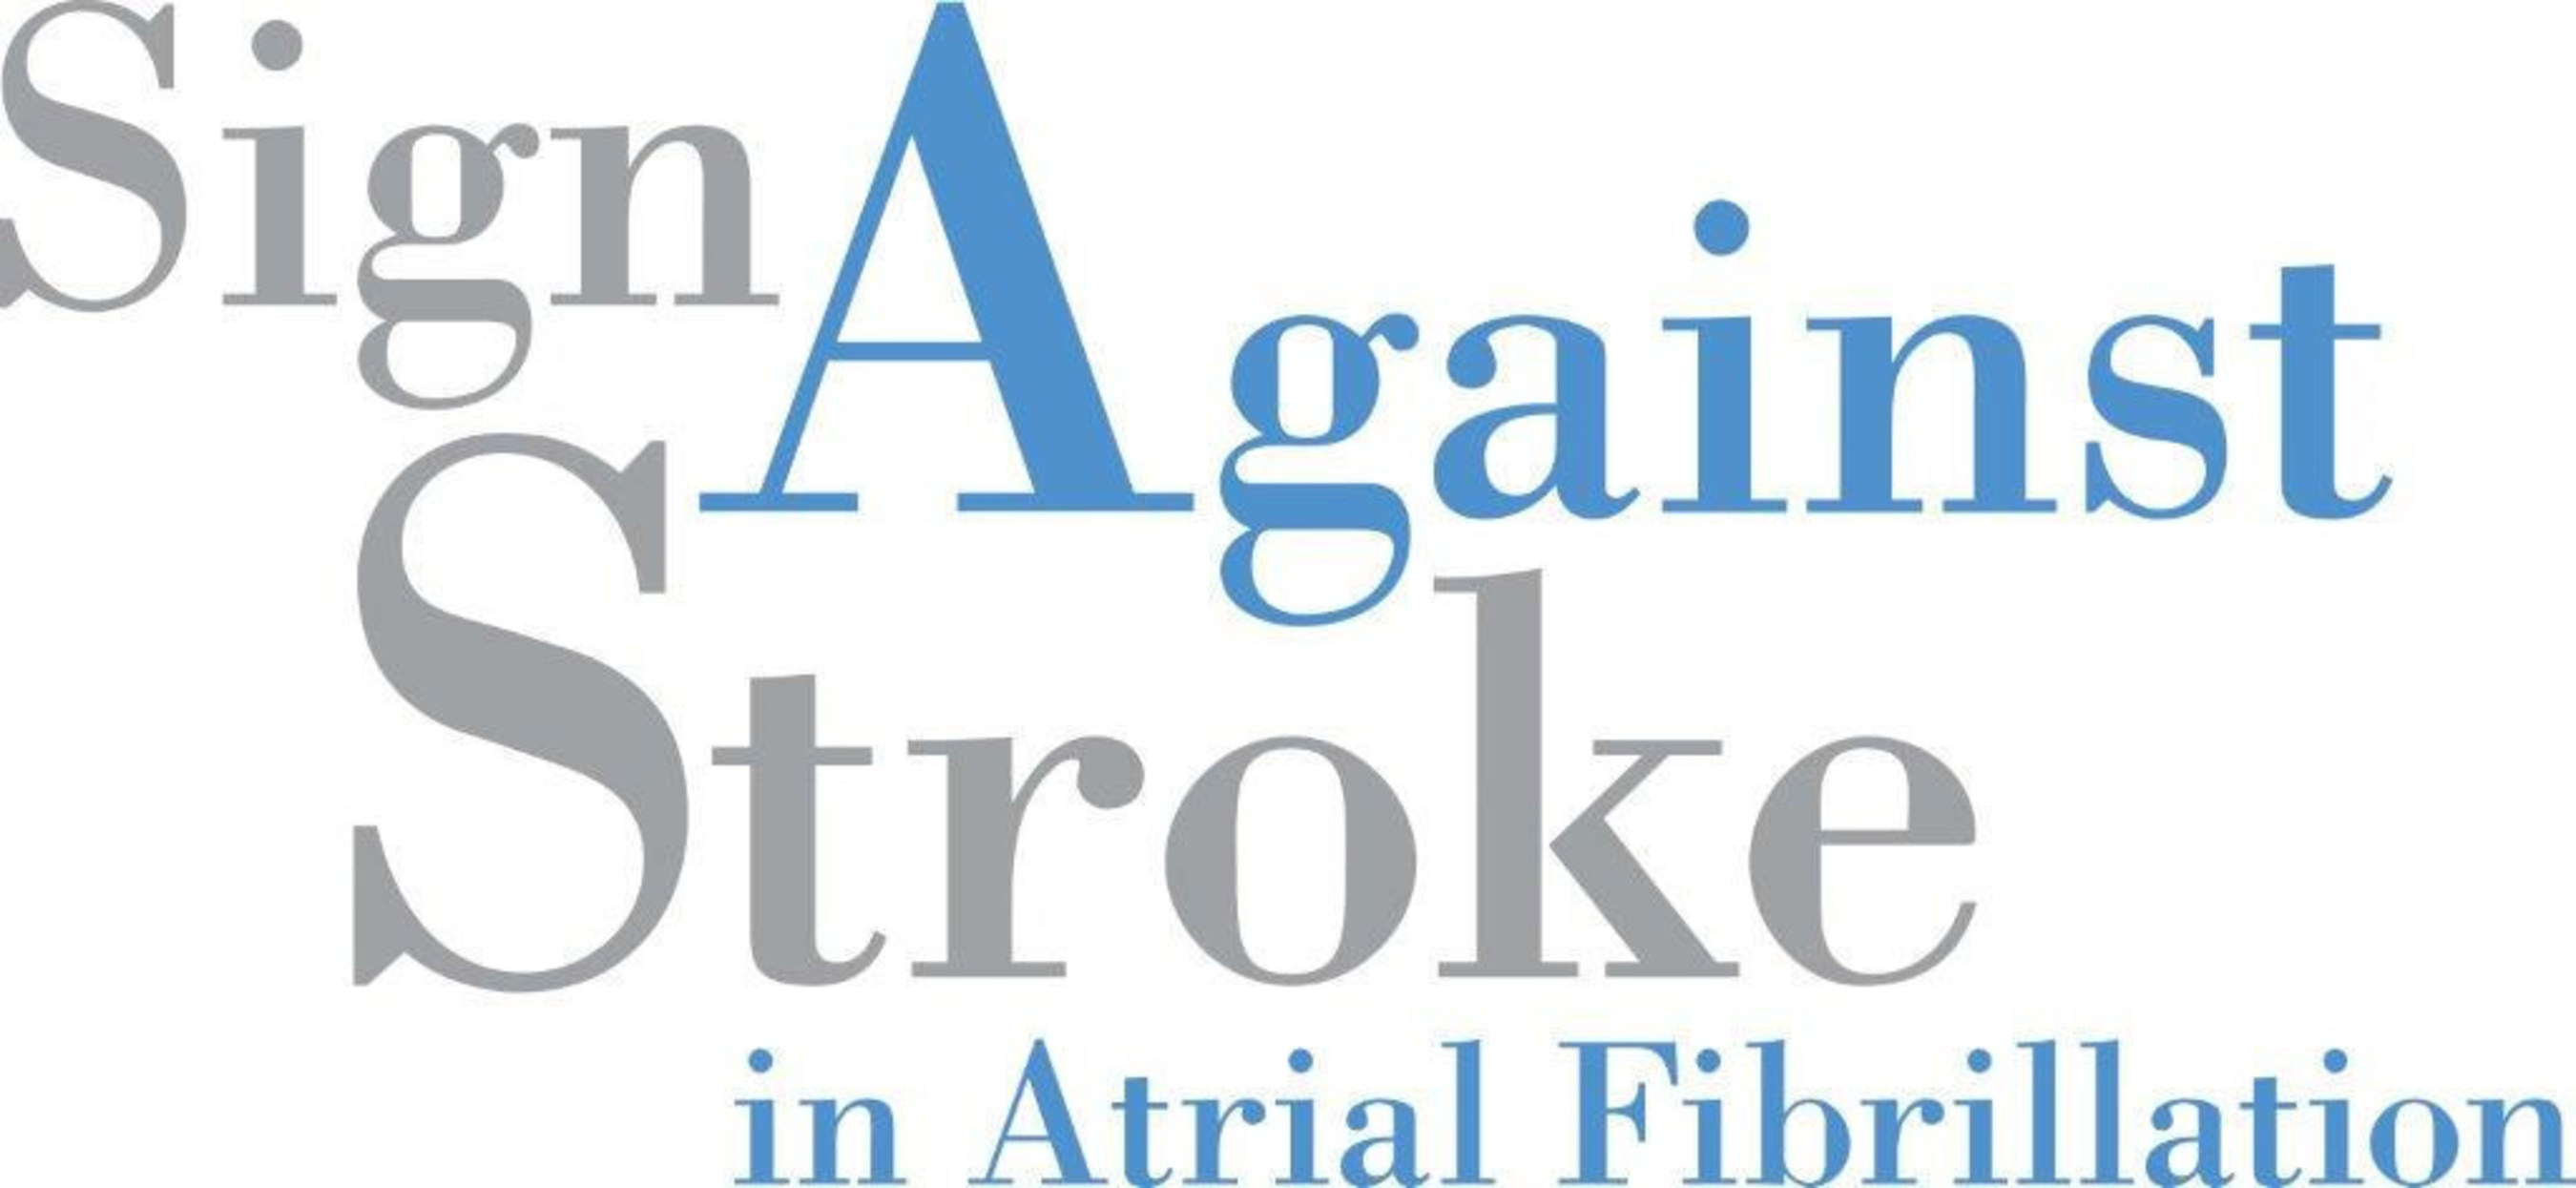 700,000 People Worldwide Rally behind Sign Against Stroke Task Force to Call AF Care and Stroke Prevention to be Prioritised on National Health Agendas (PRNewsFoto/Sign Against Stroke) (PRNewsFoto/Sign Against Stroke)